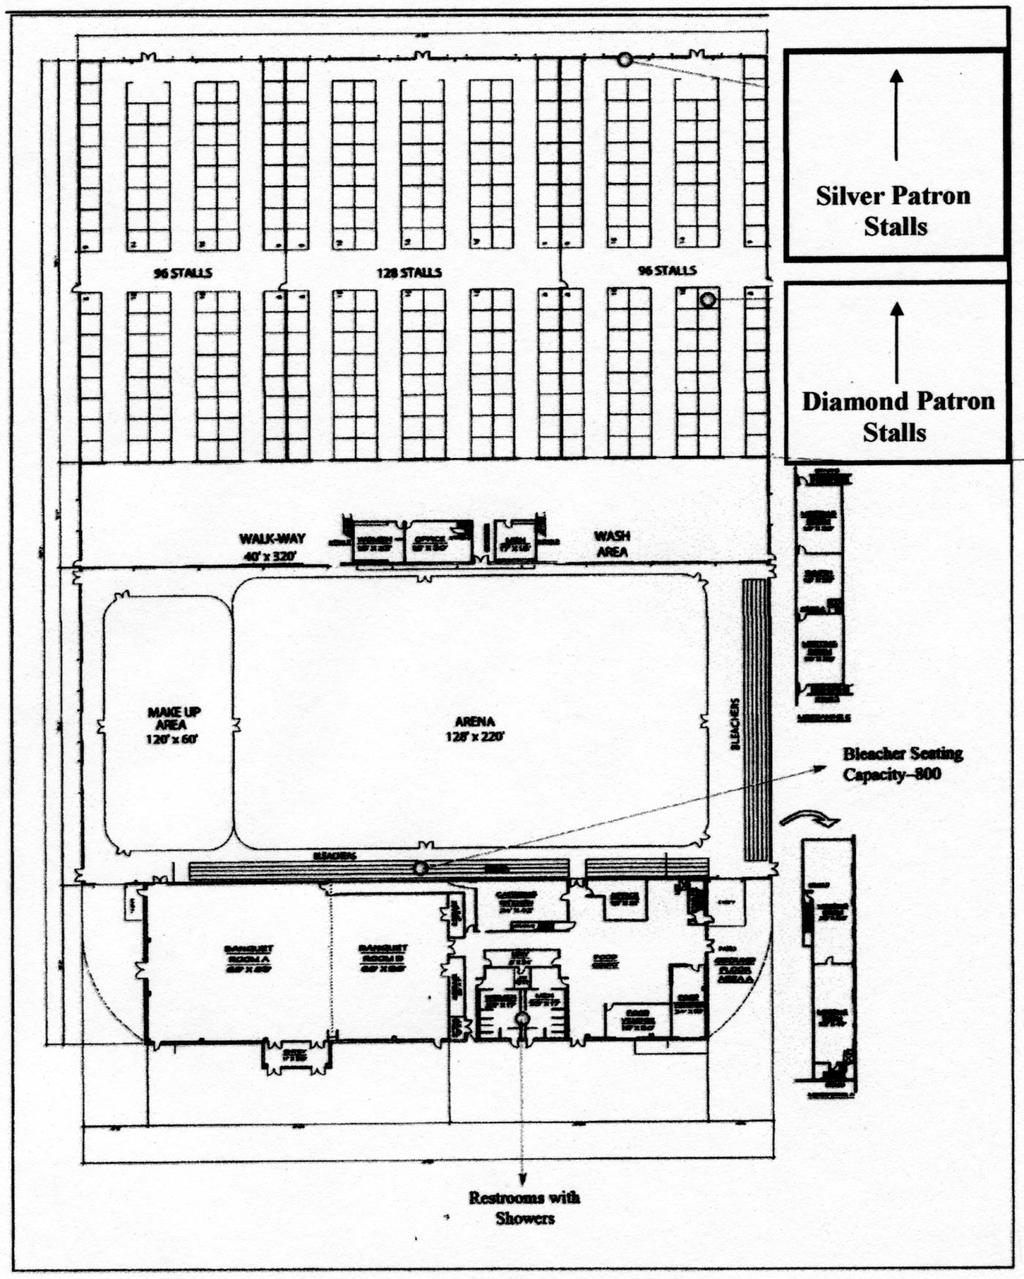 Expo Center Arena Floor Plan Diamond Patron Stalls are the front row closest to the arena. Silver Patron Stalls are the front row of the second aisle away from the arena.